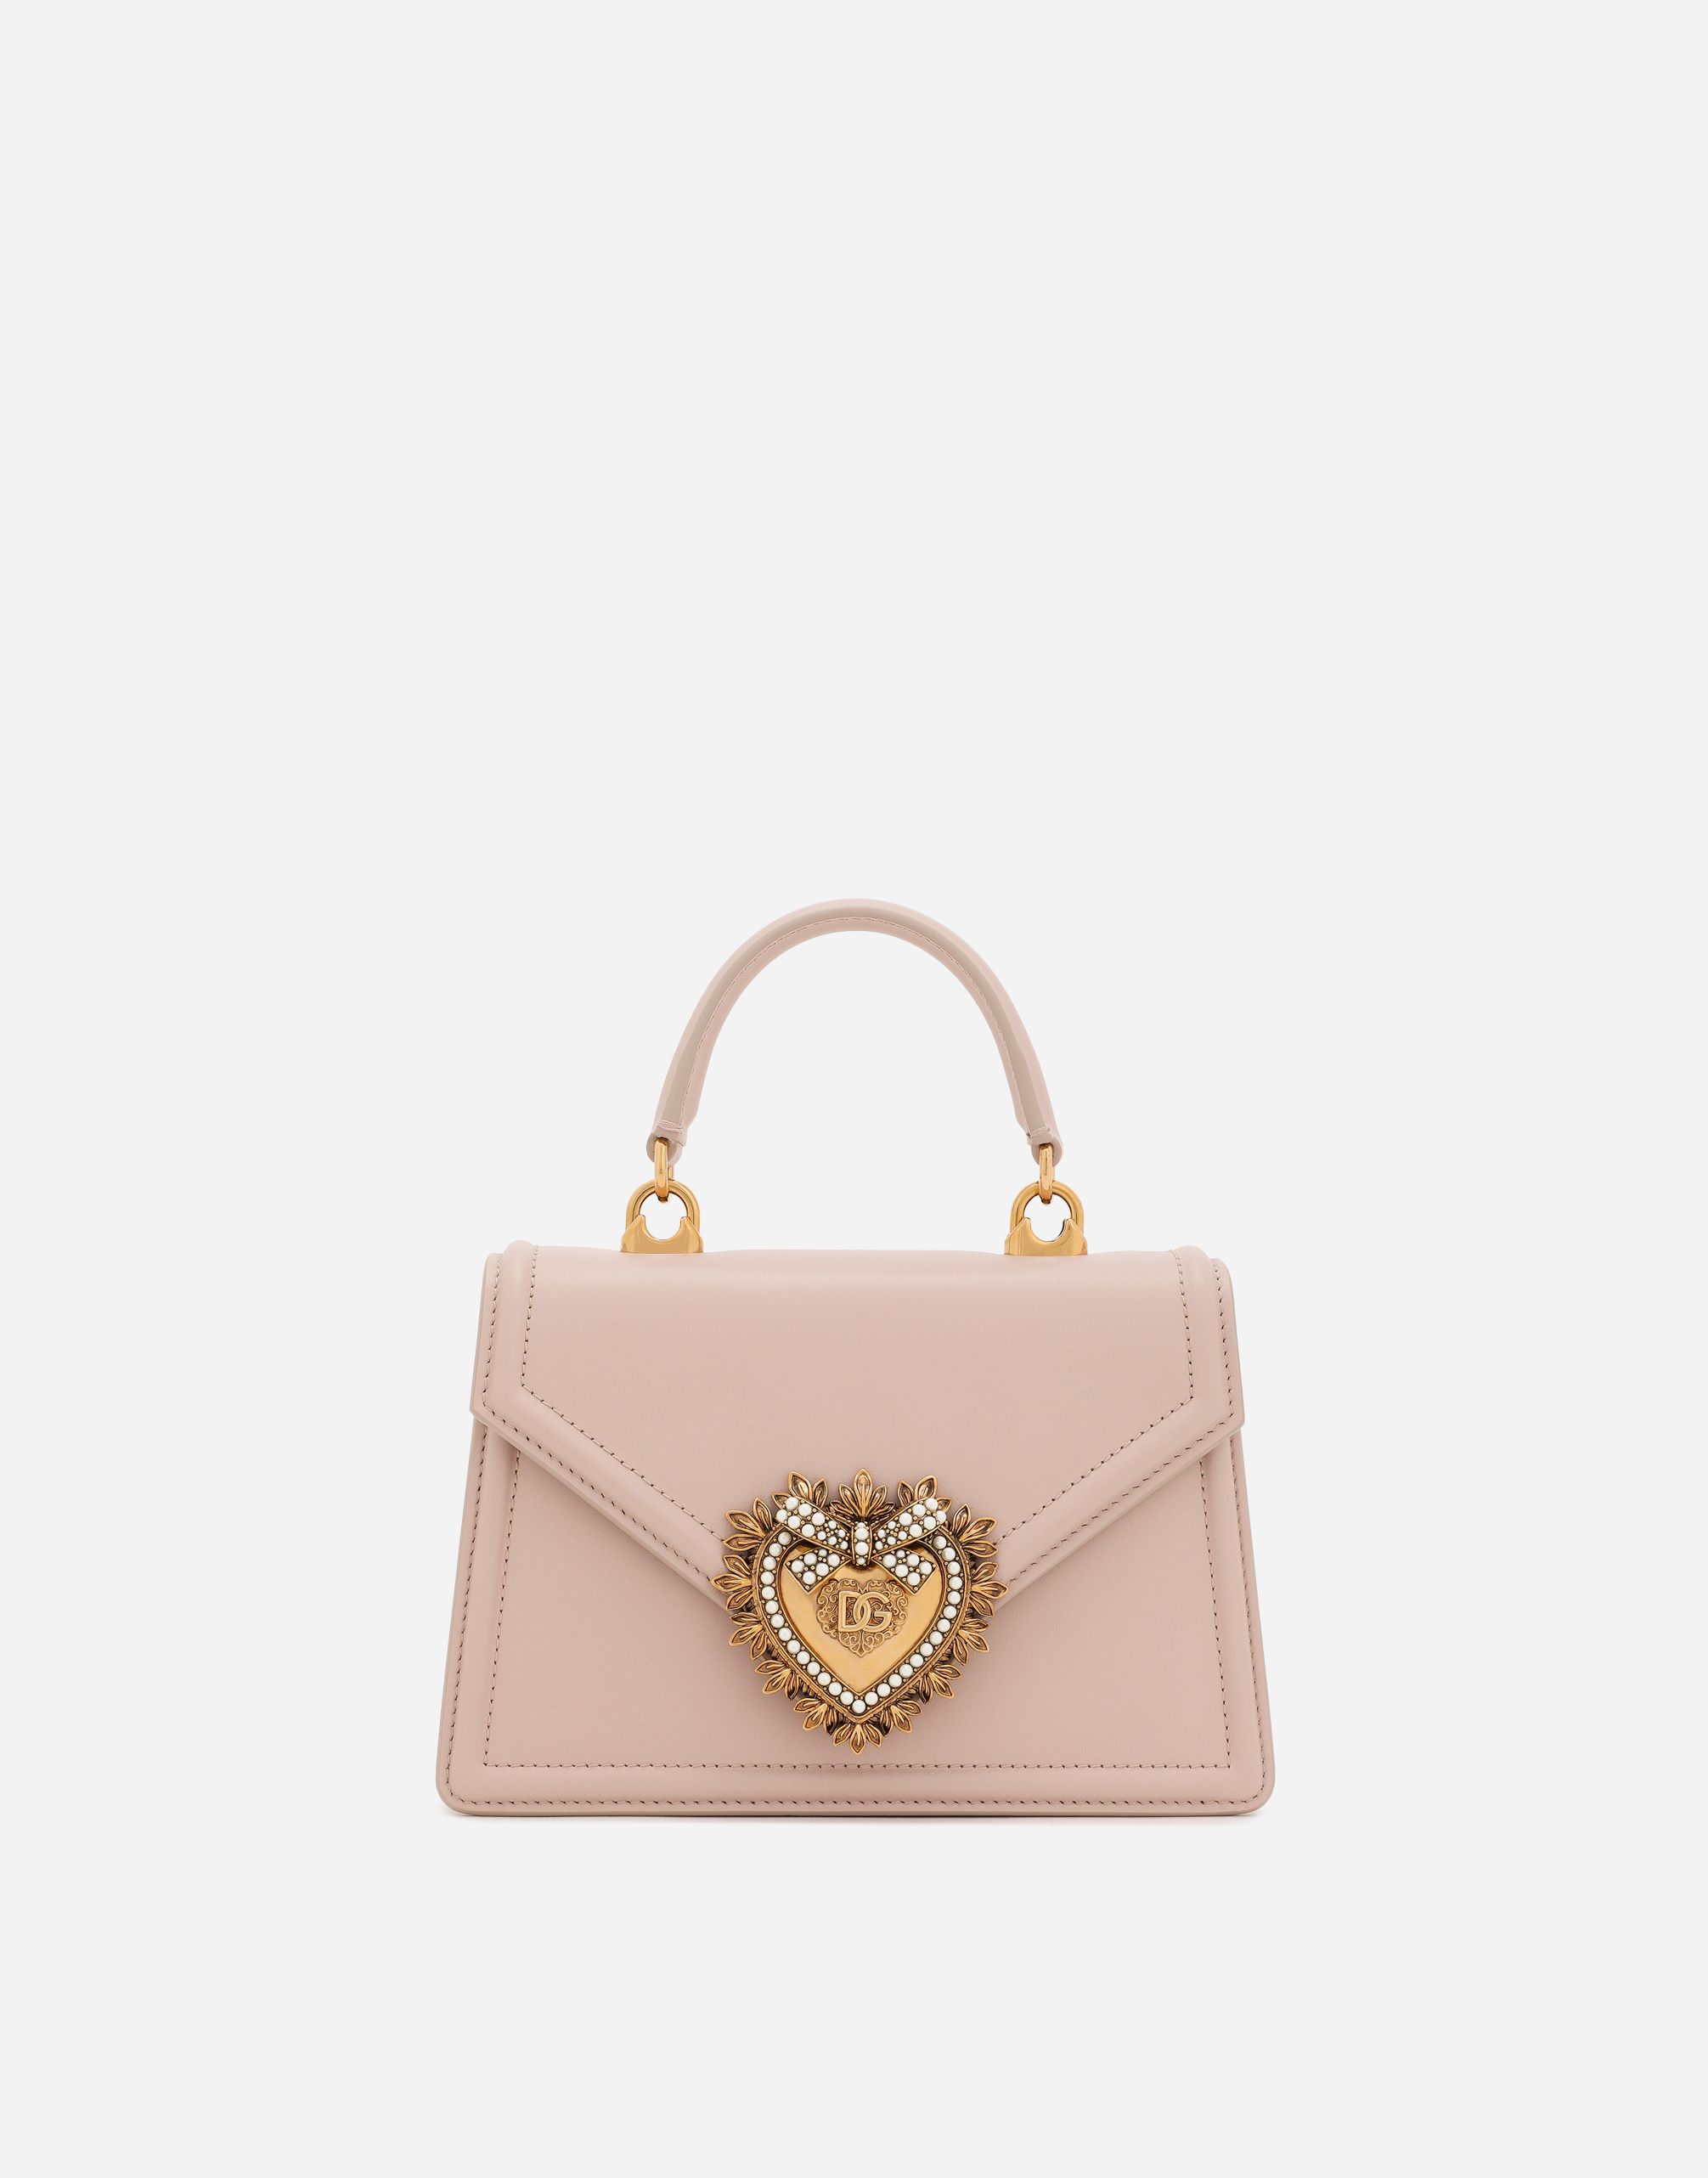 Small smooth calfskin Devotion bag in Pale Pink